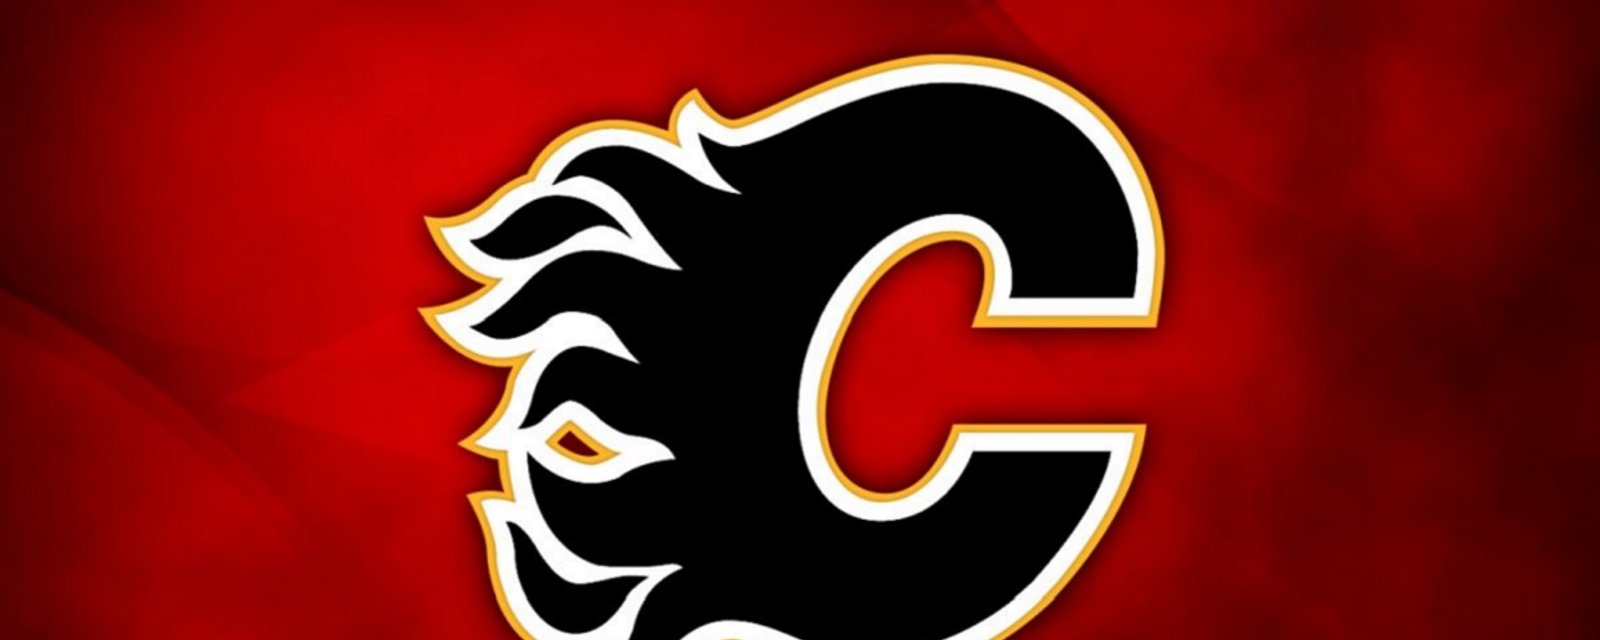 Calgary Flames appear poised to make another move.